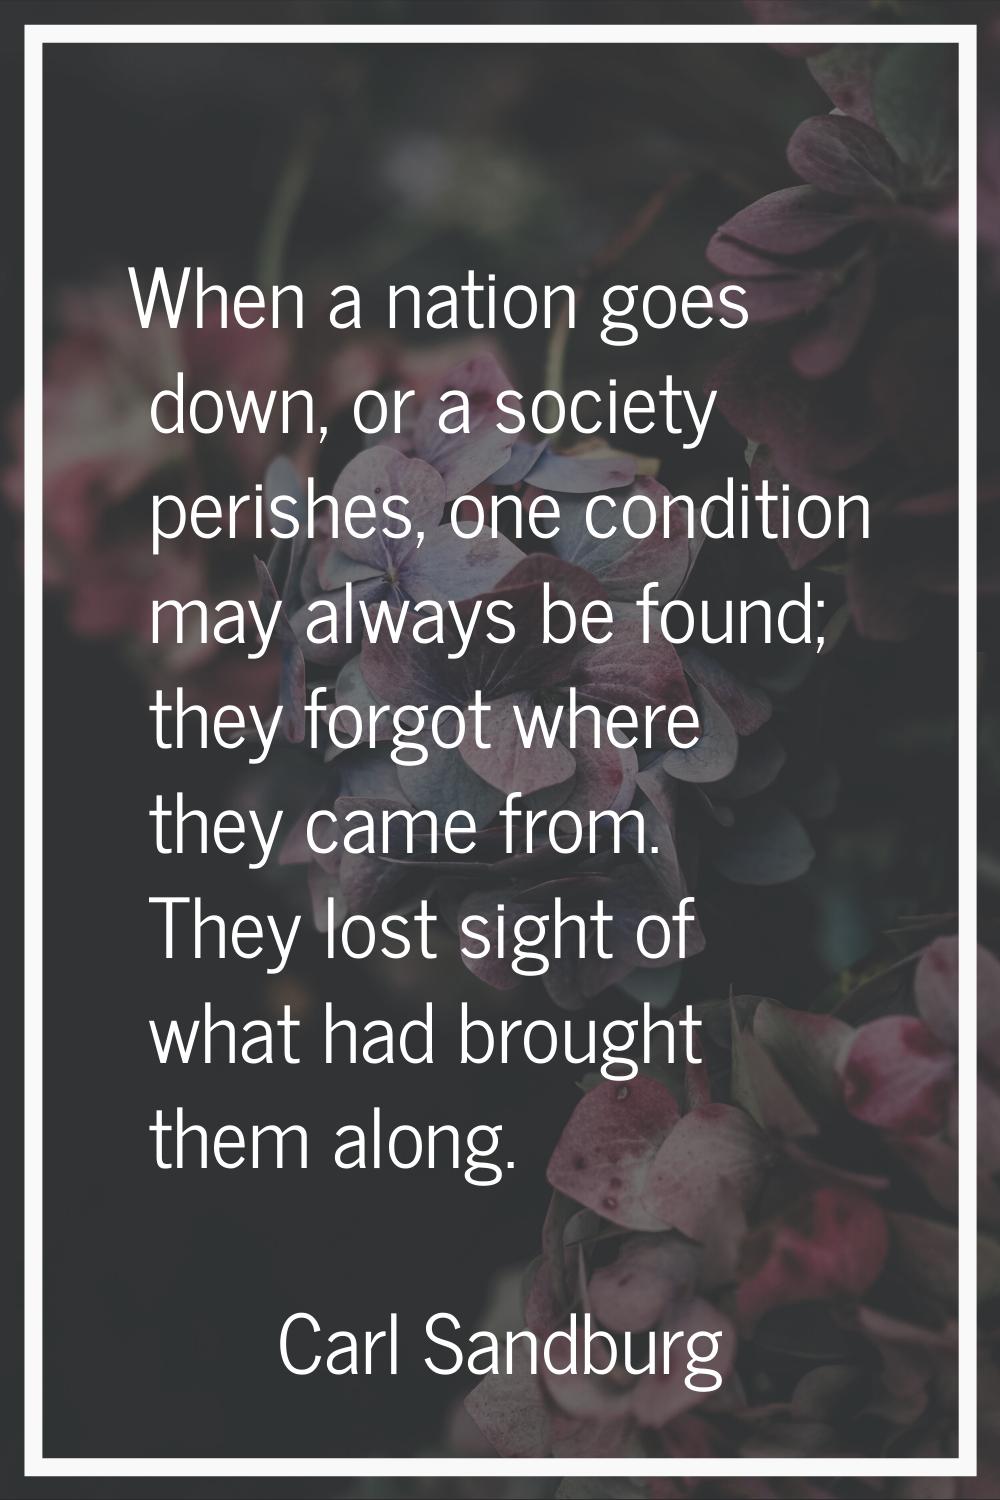 When a nation goes down, or a society perishes, one condition may always be found; they forgot wher